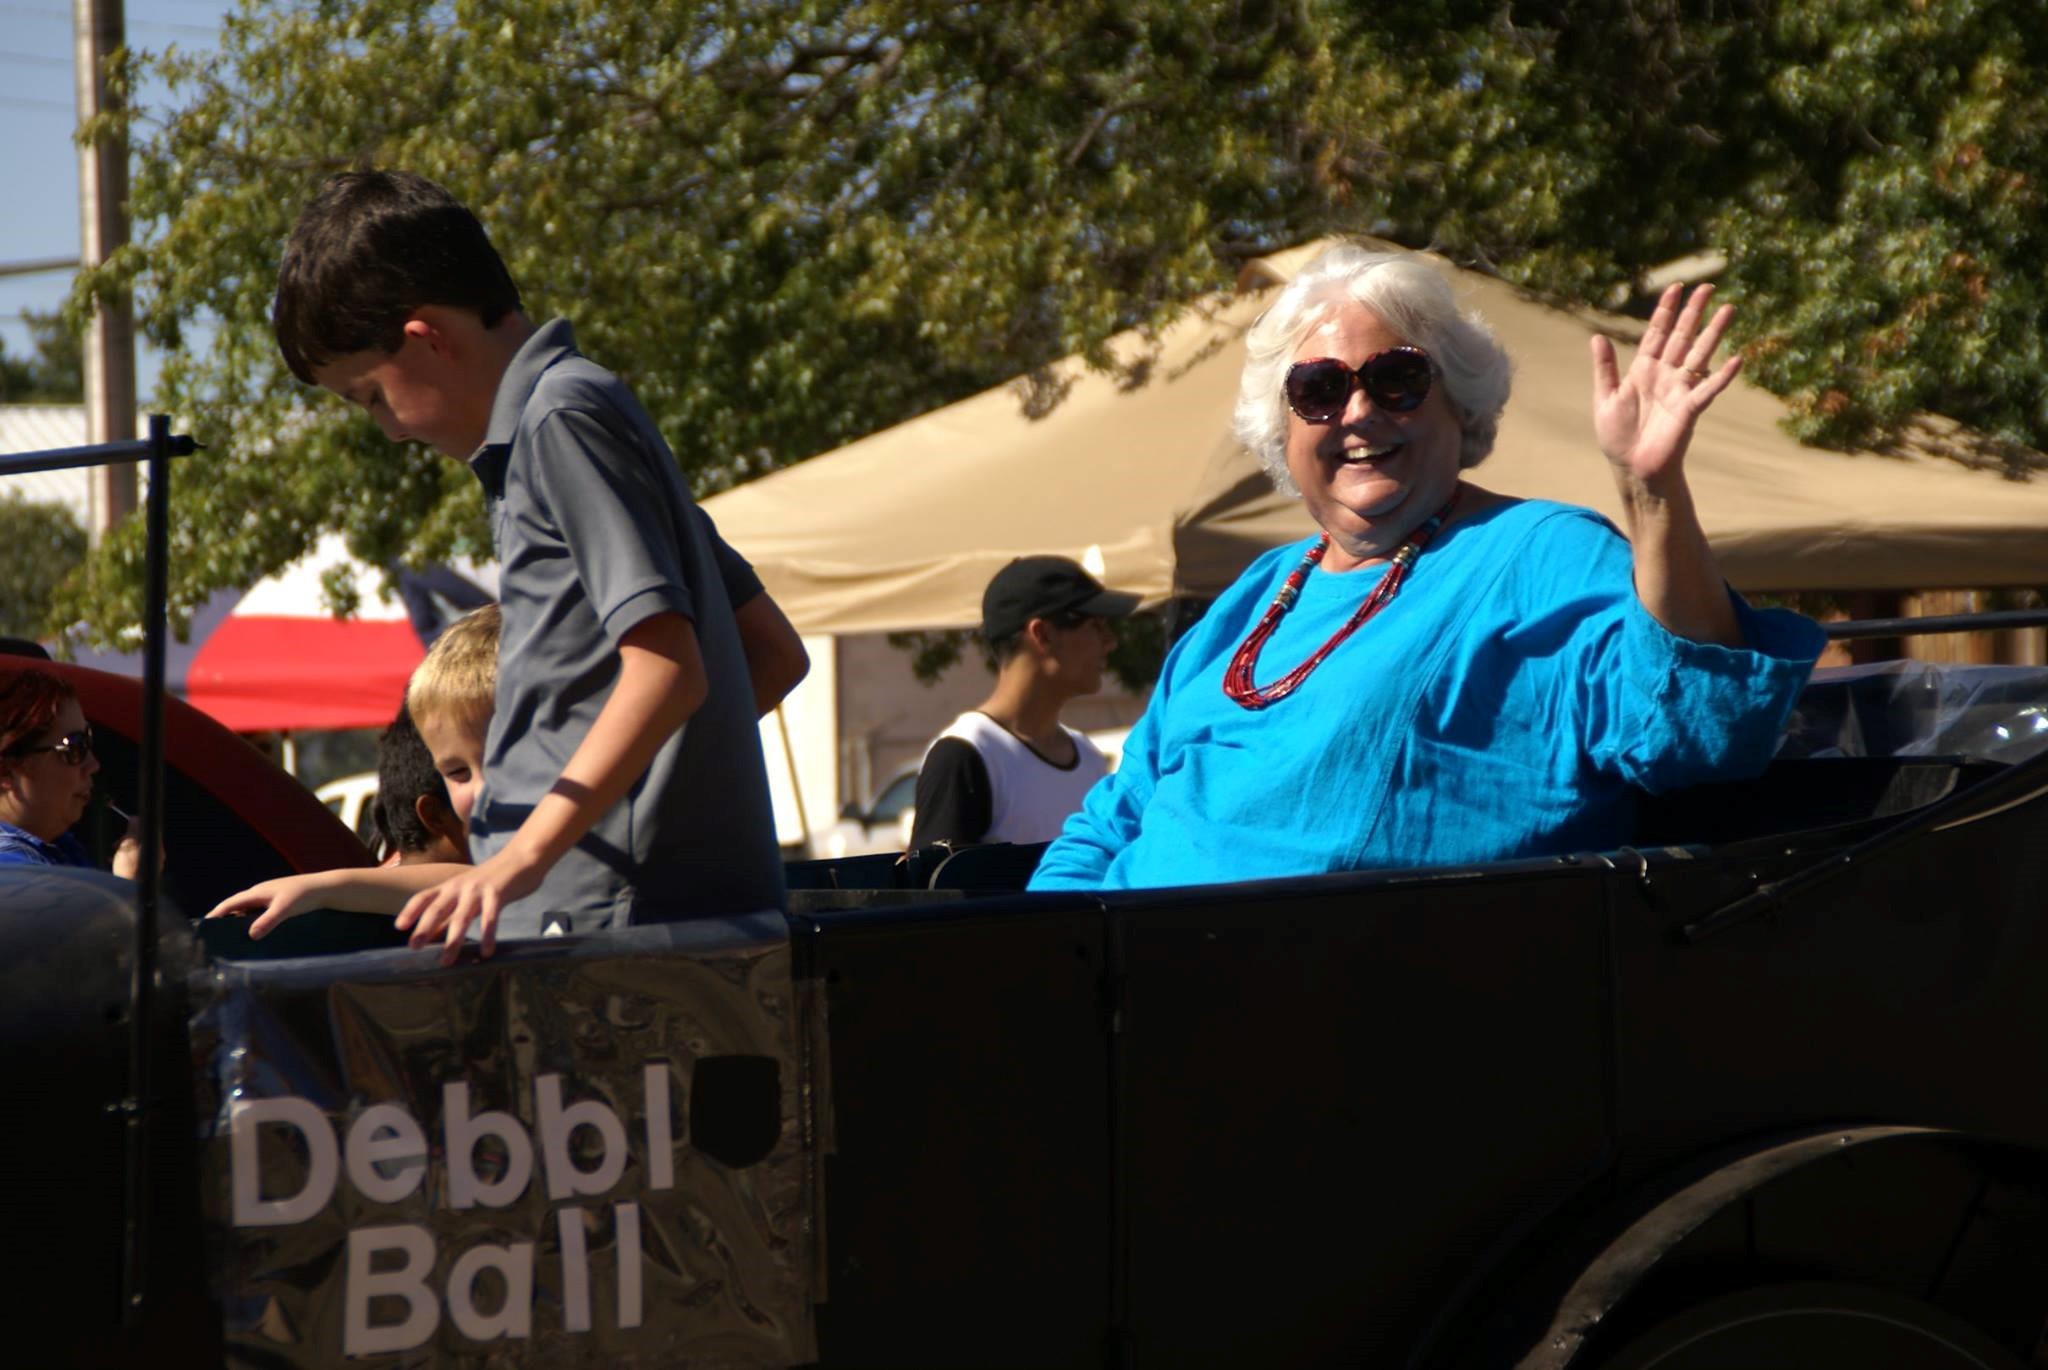 A photo of Debbie Ball, waving and cheering from her car.